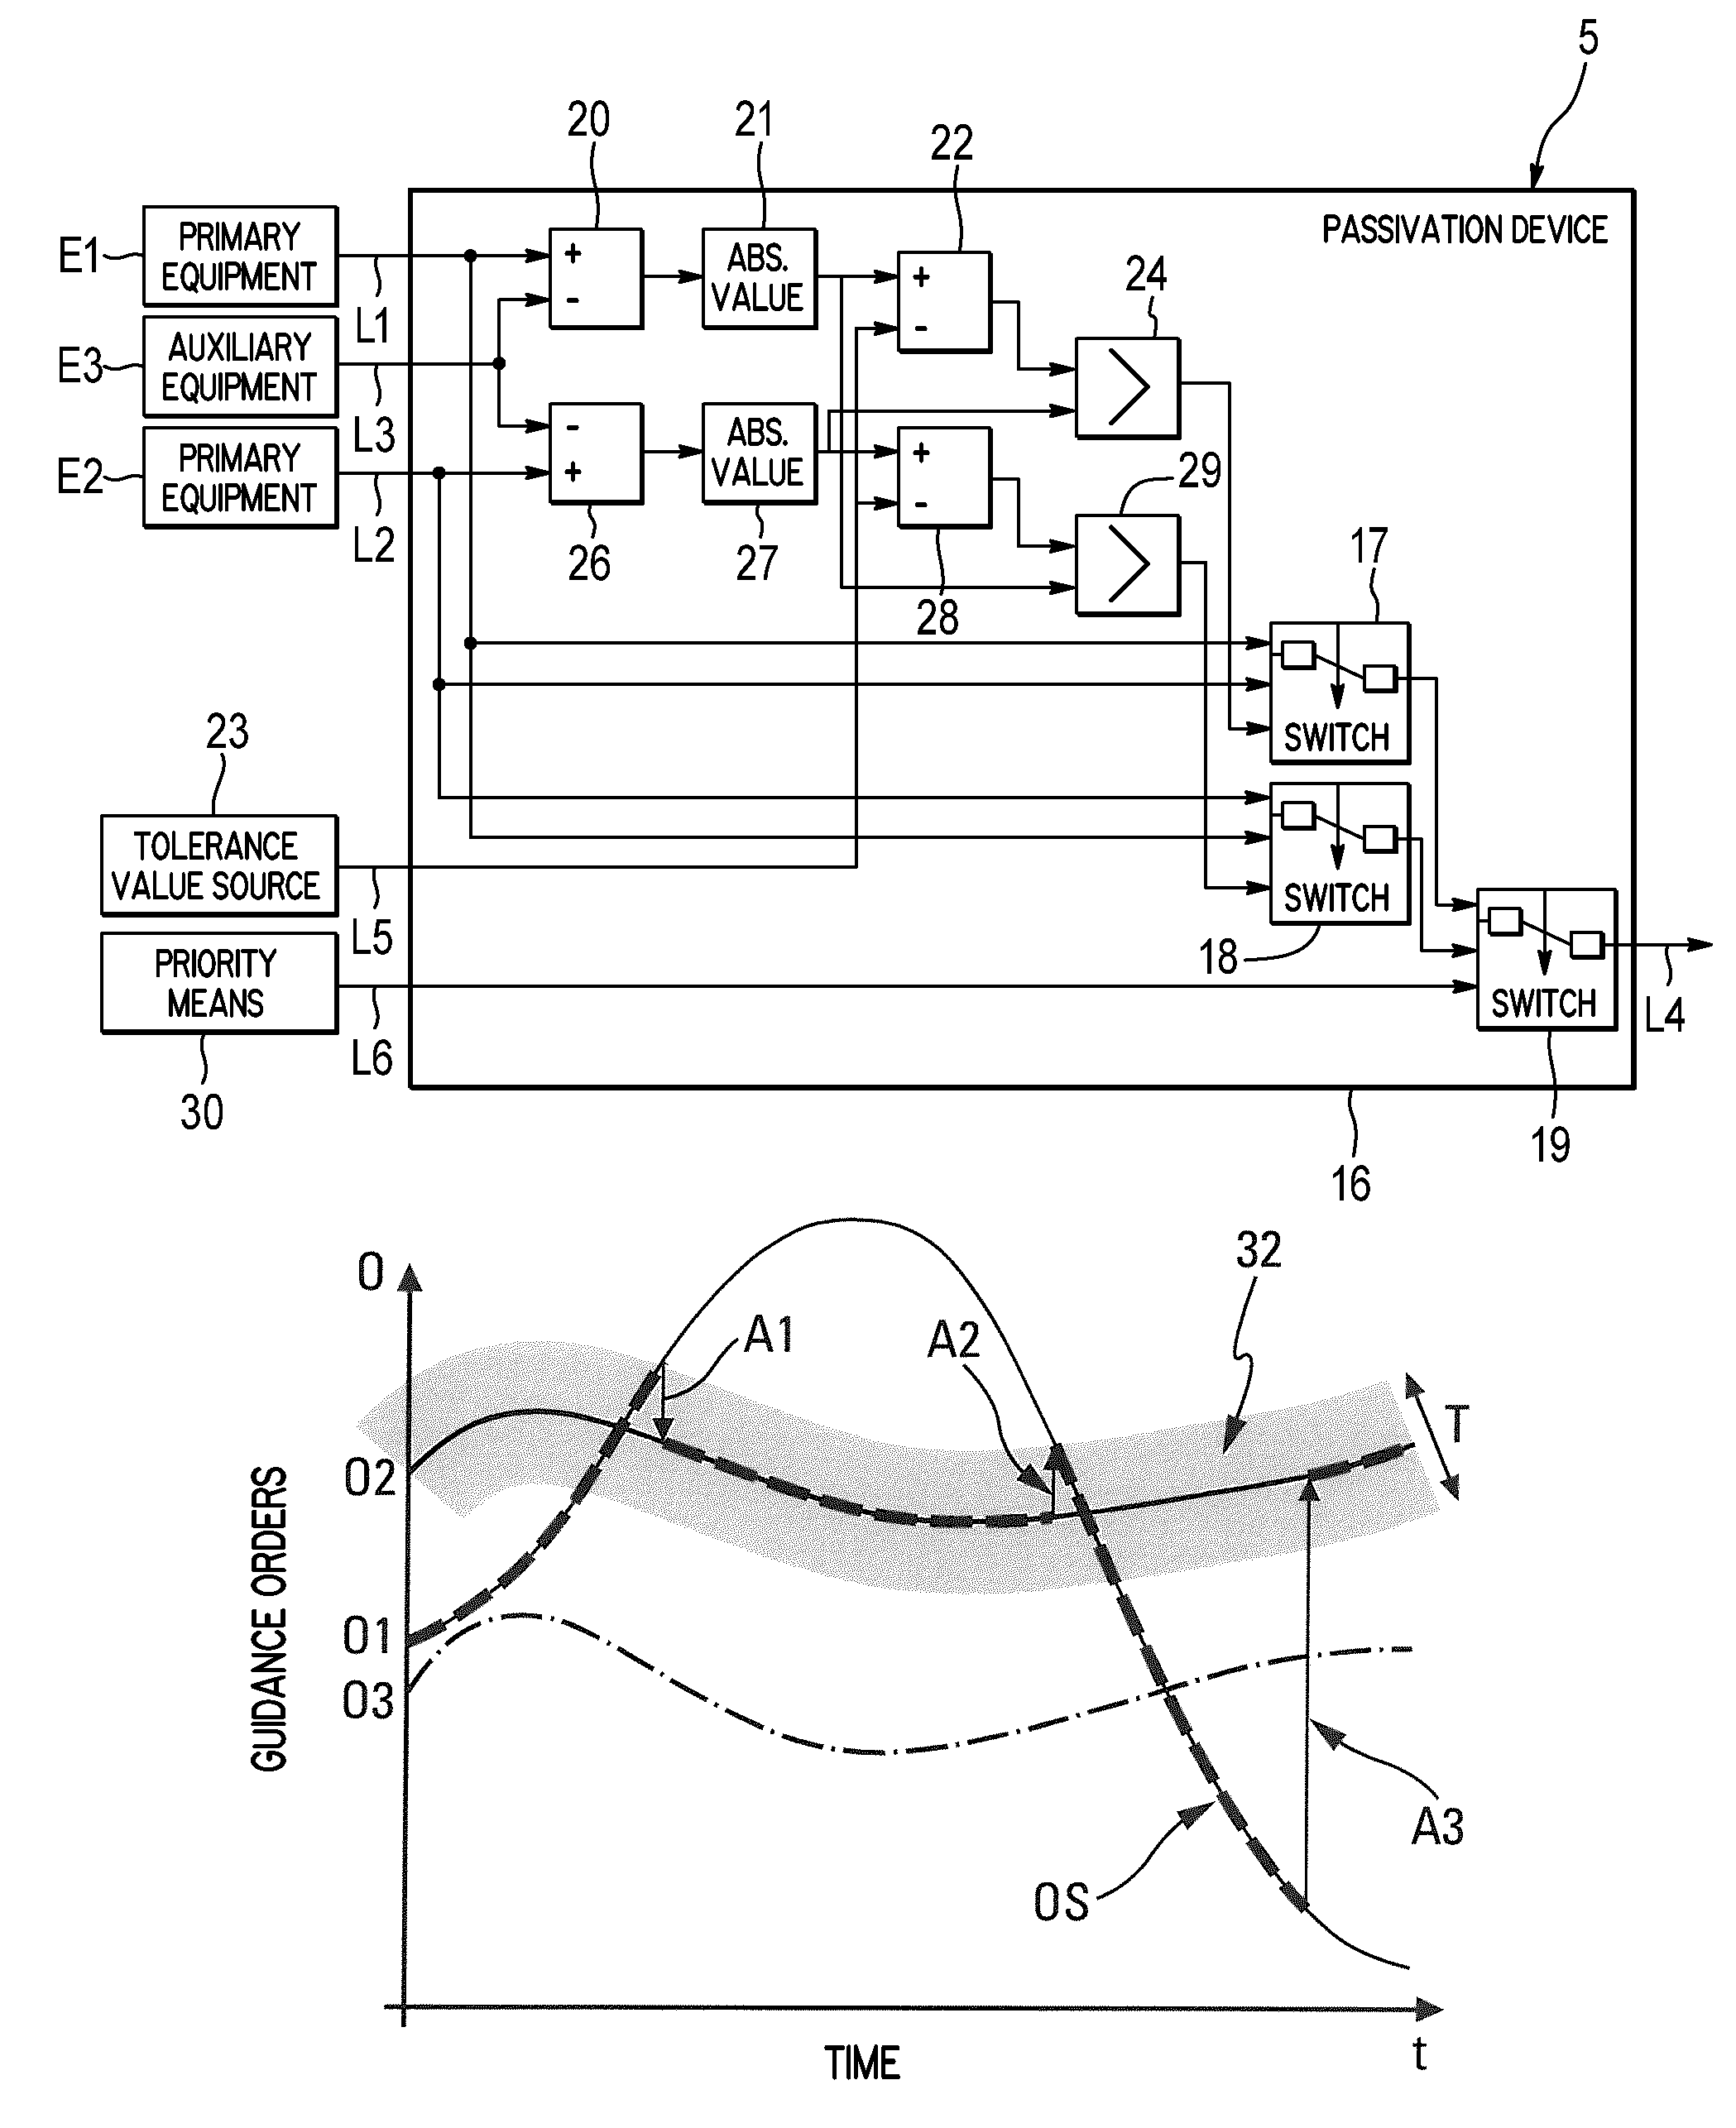 Method and device for the passivation of guidance orders of an aircraft